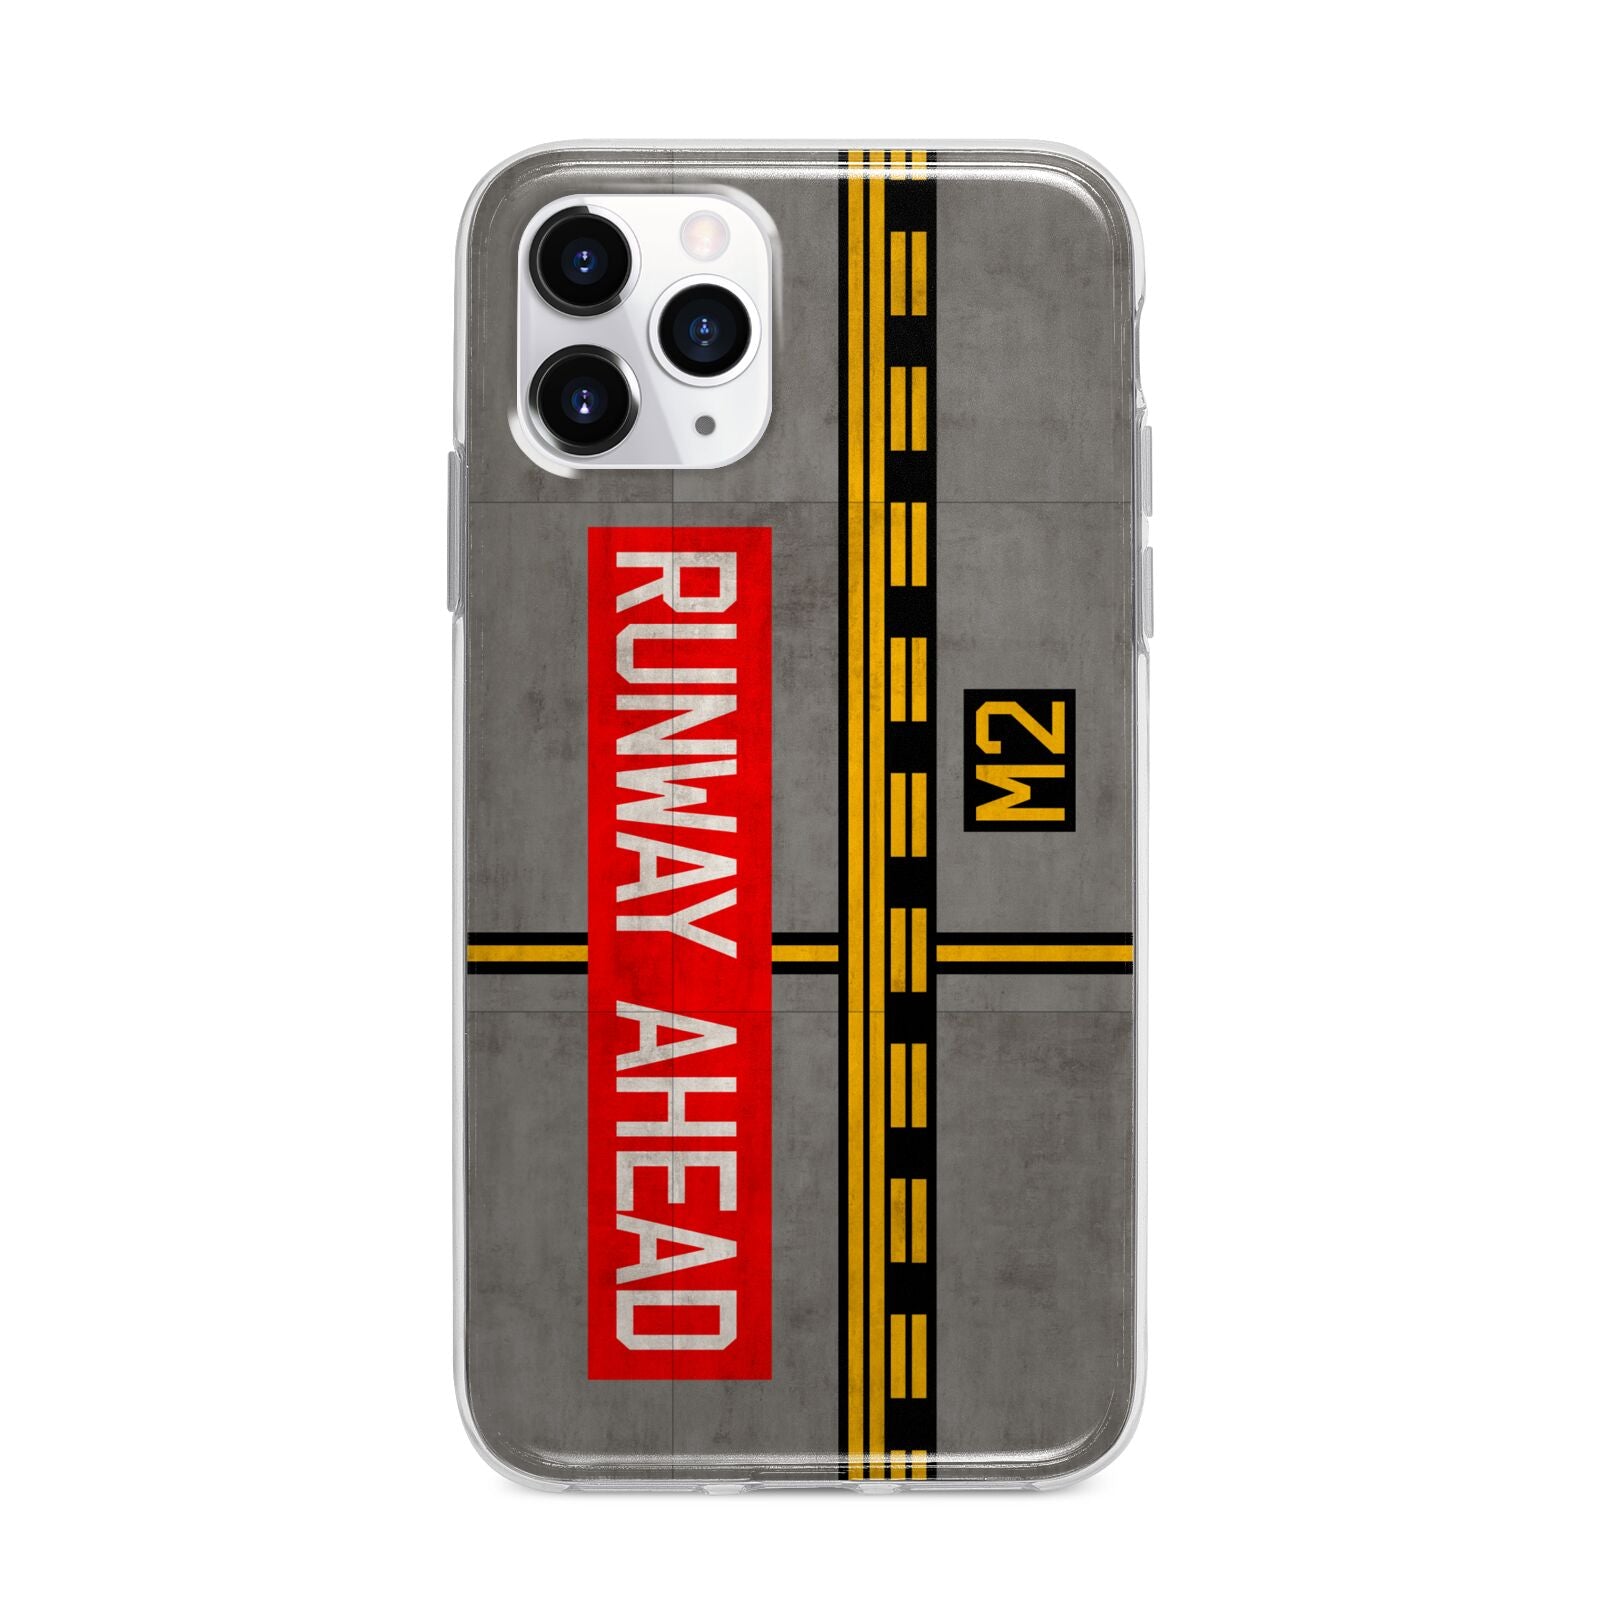 Runway Ahead Apple iPhone 11 Pro Max in Silver with Bumper Case